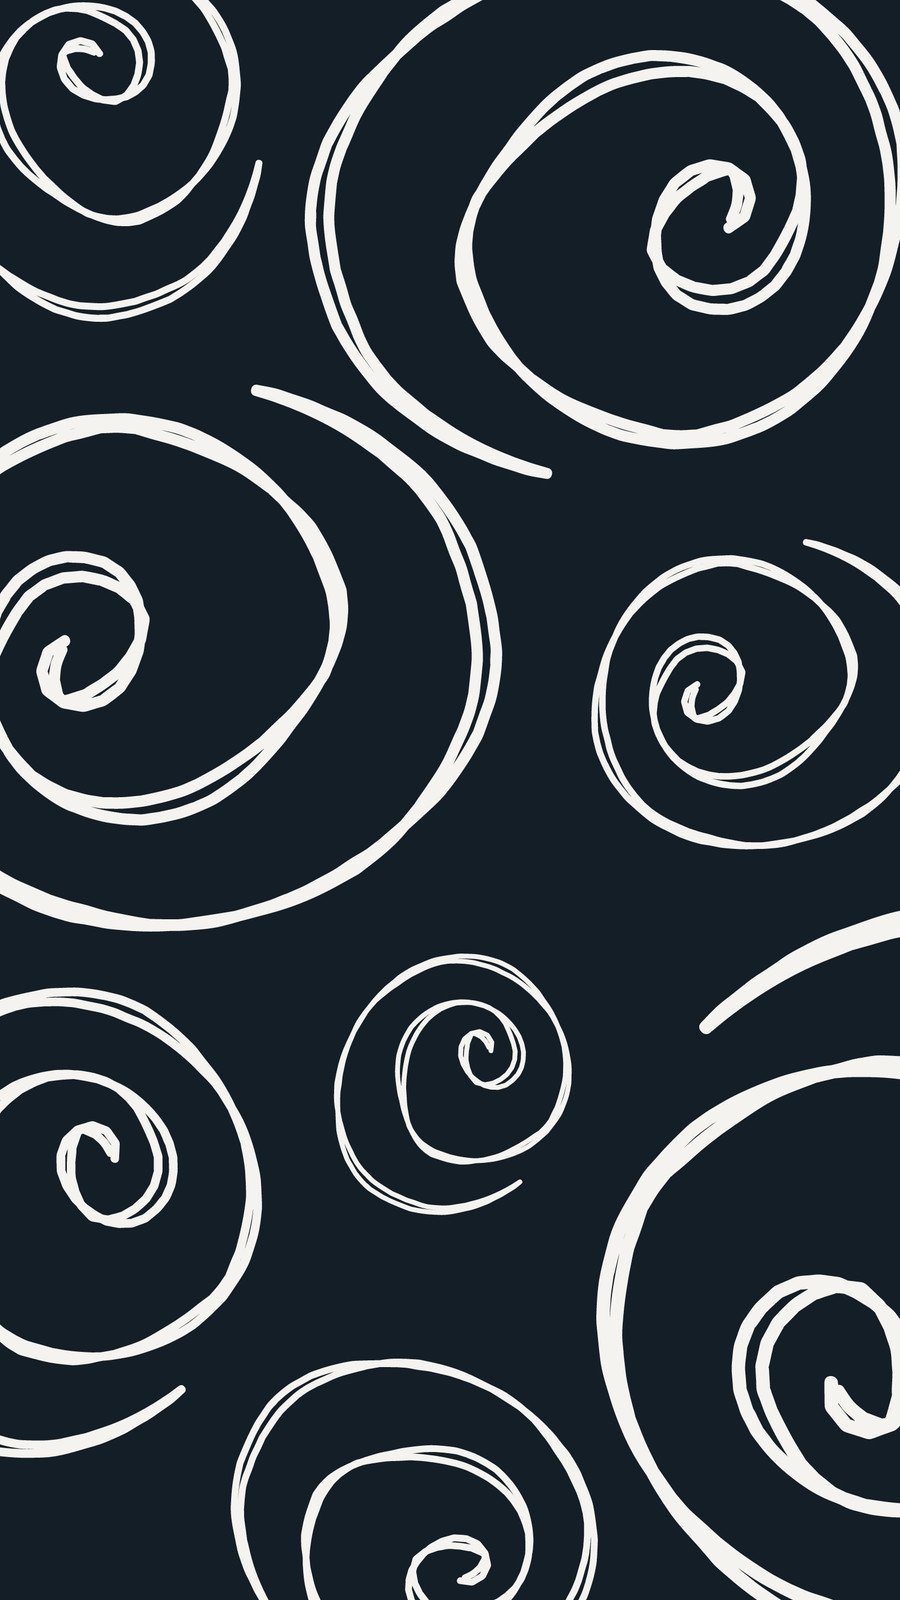 Black and White Swirl Wallpaper 32 images